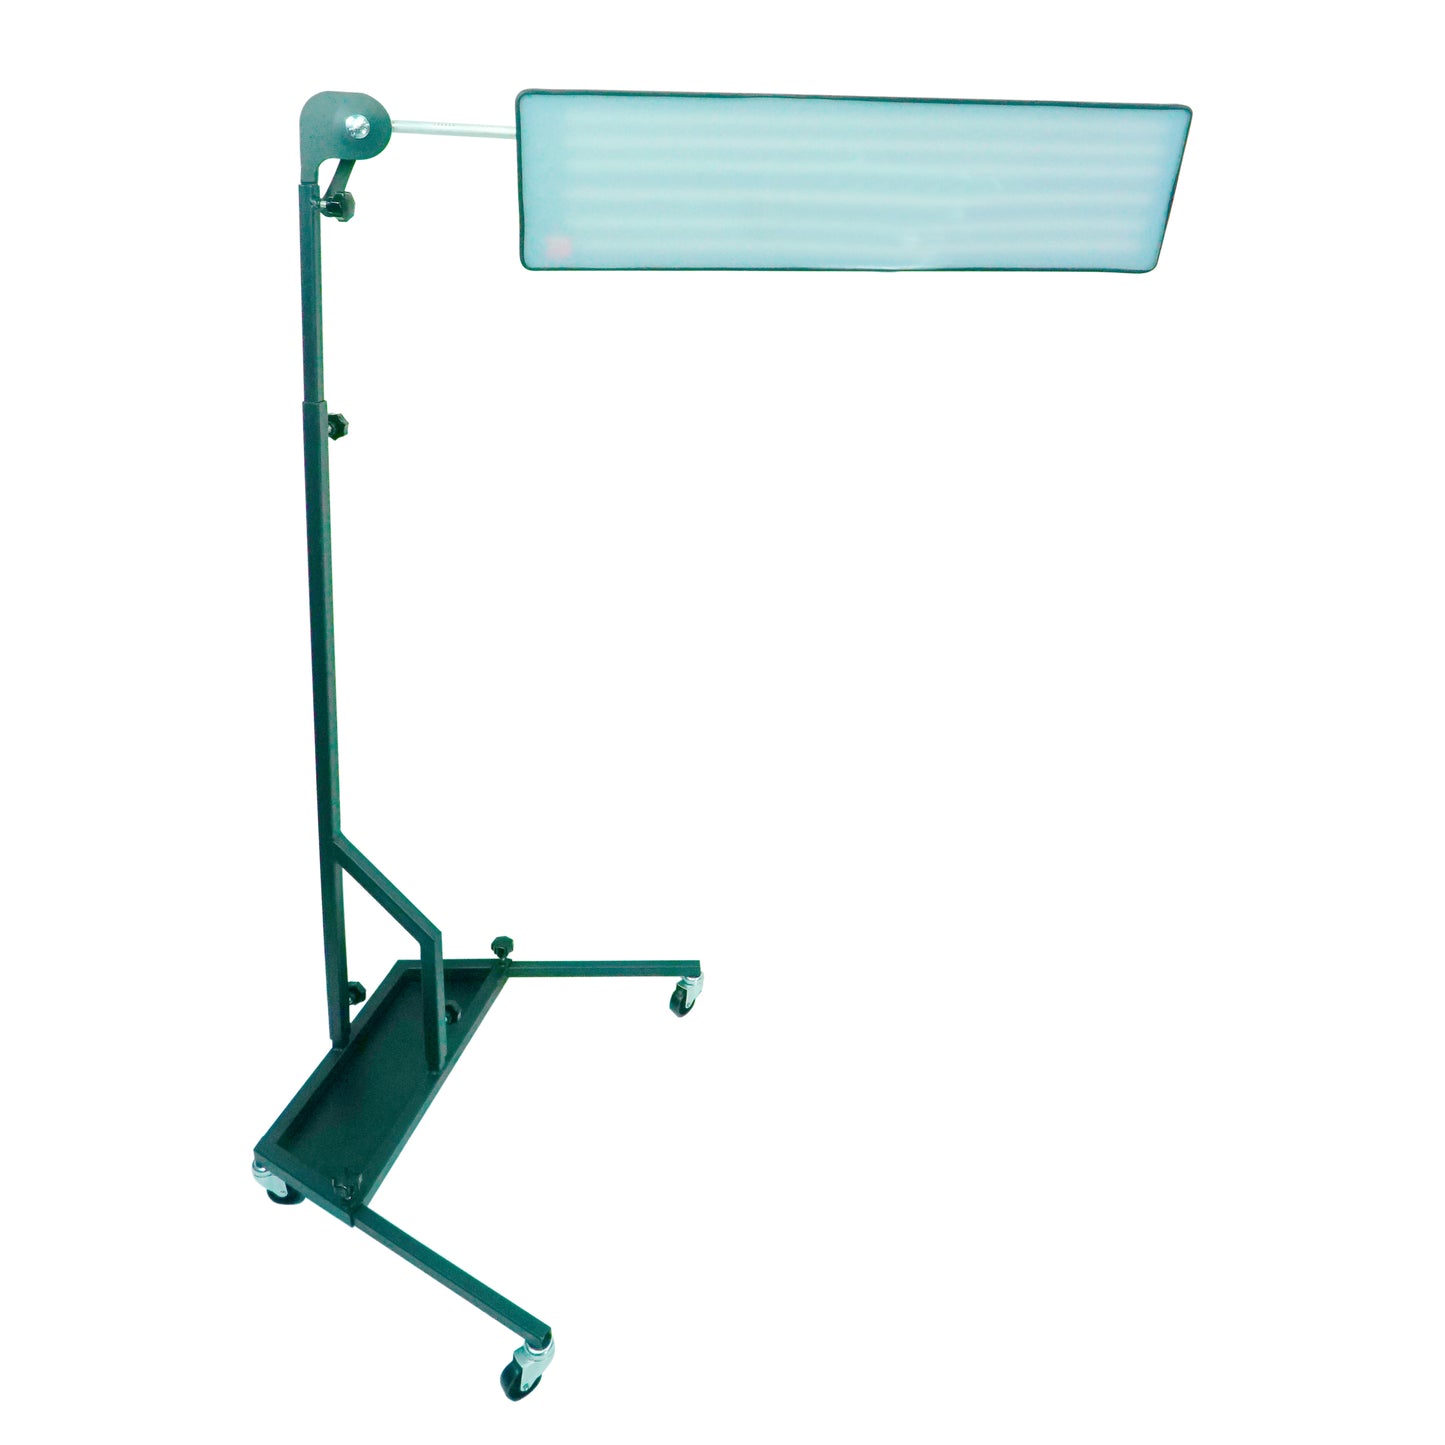 Pdr Tools / Big Led Lamp With Stand and Battery